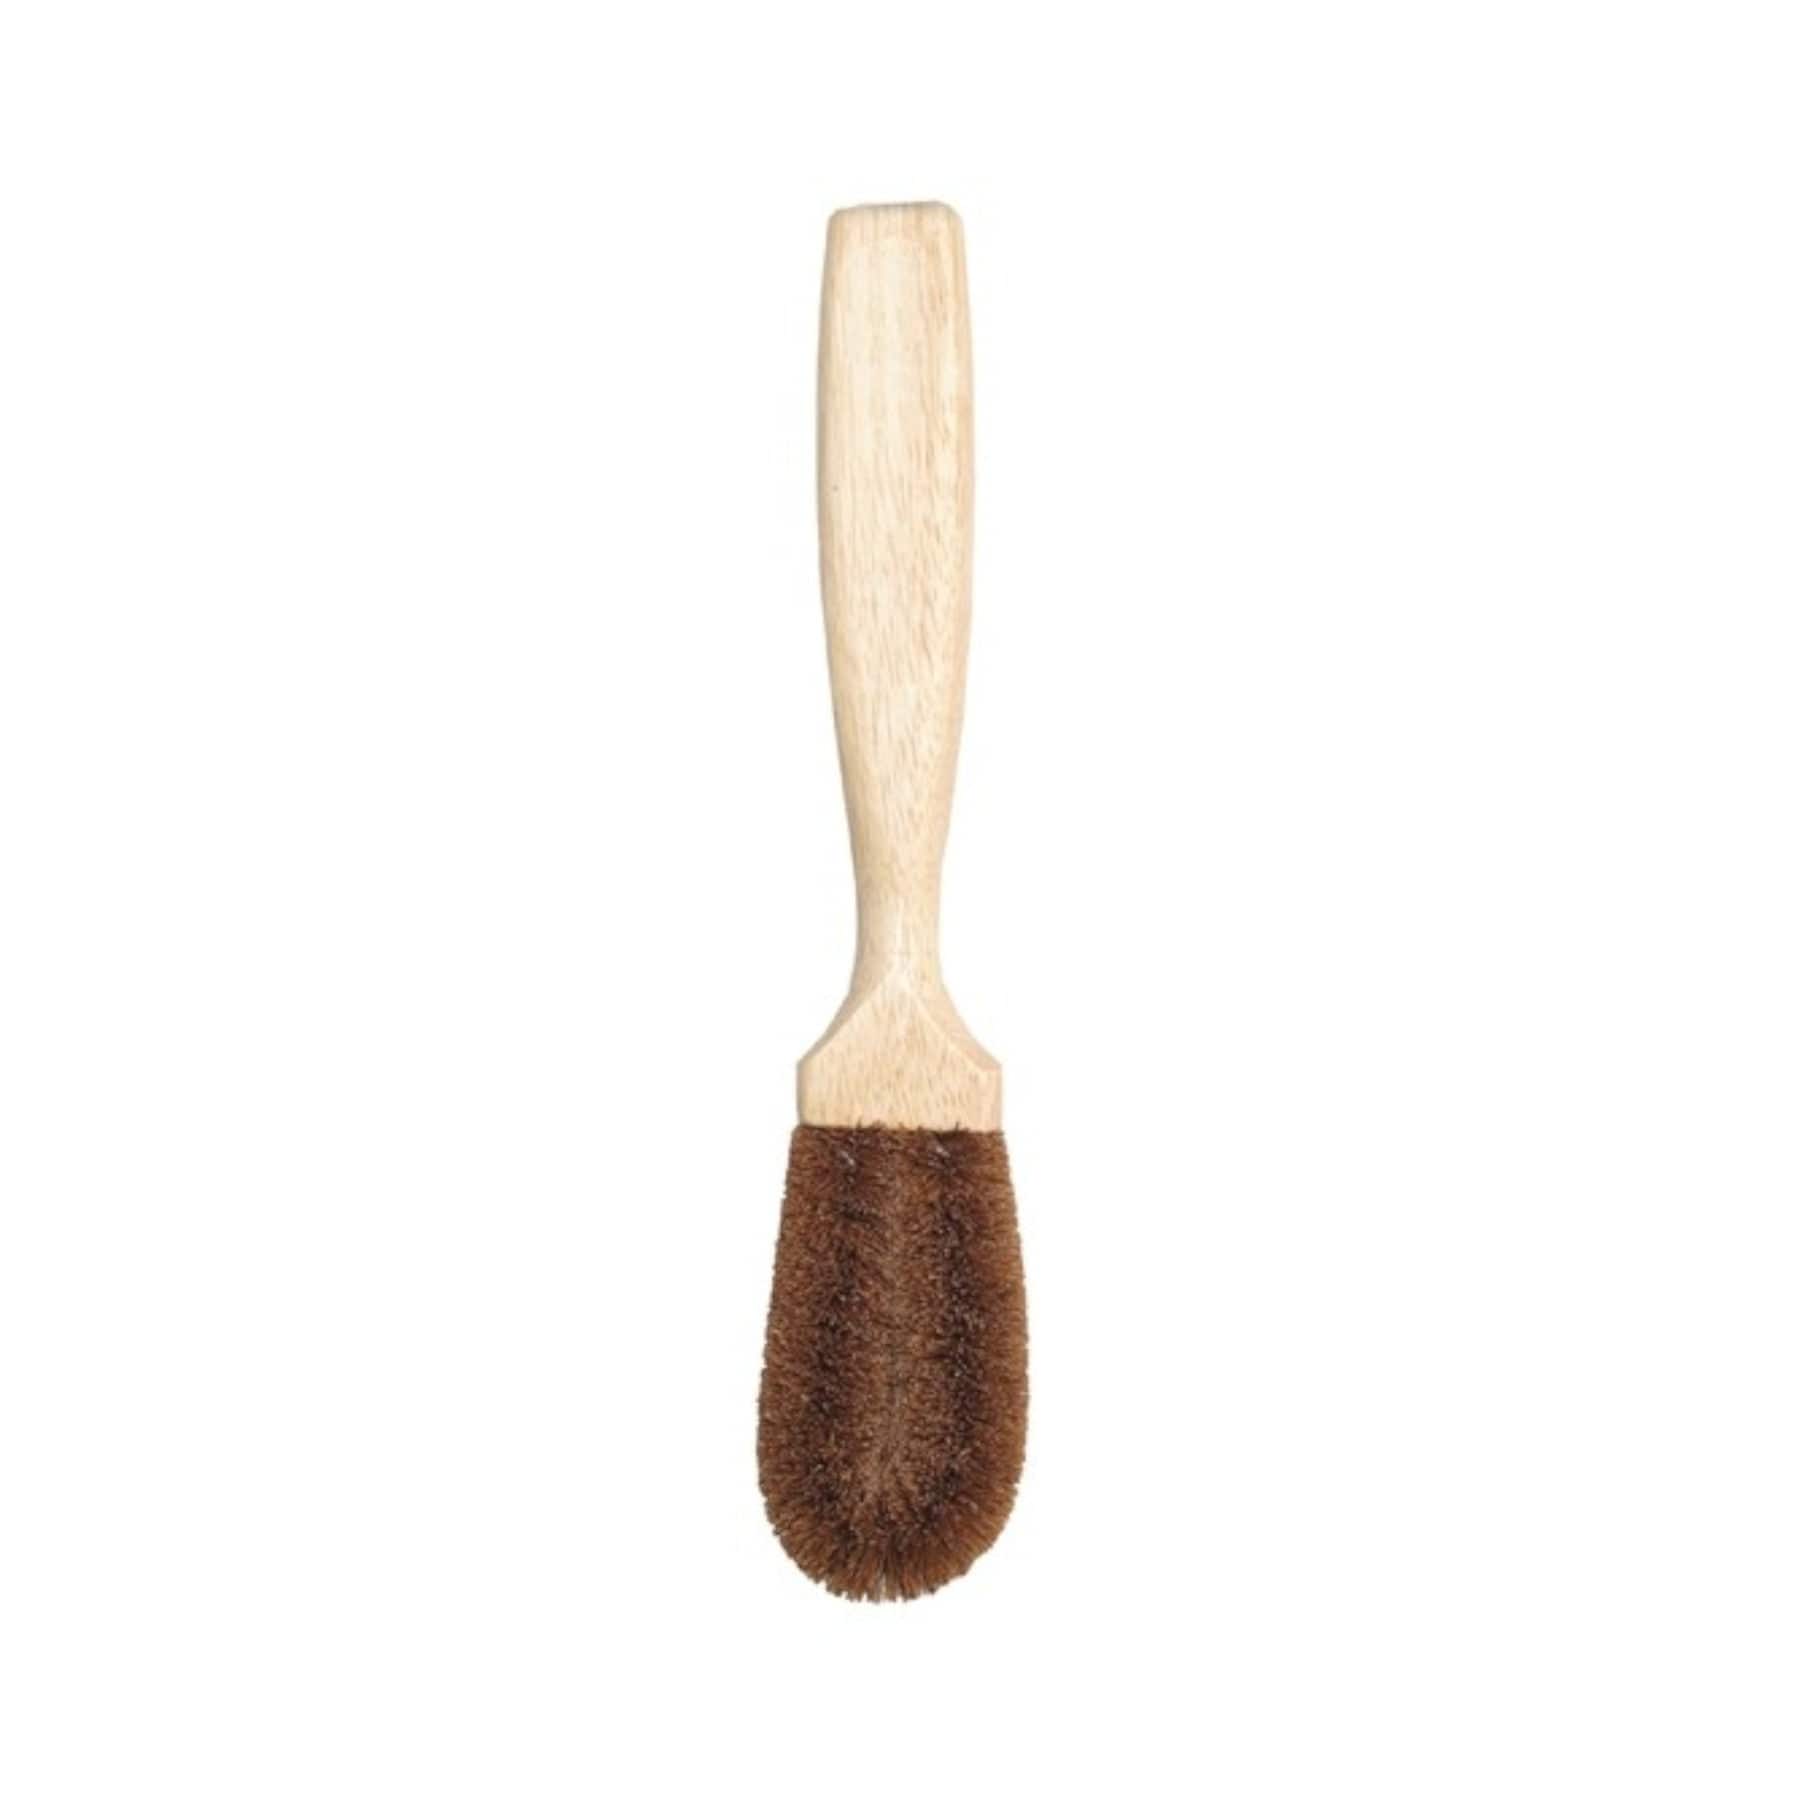 Wooden handle brush with stiff brown bristles isolated on white background, cleaning tool, scrub brush, household equipment